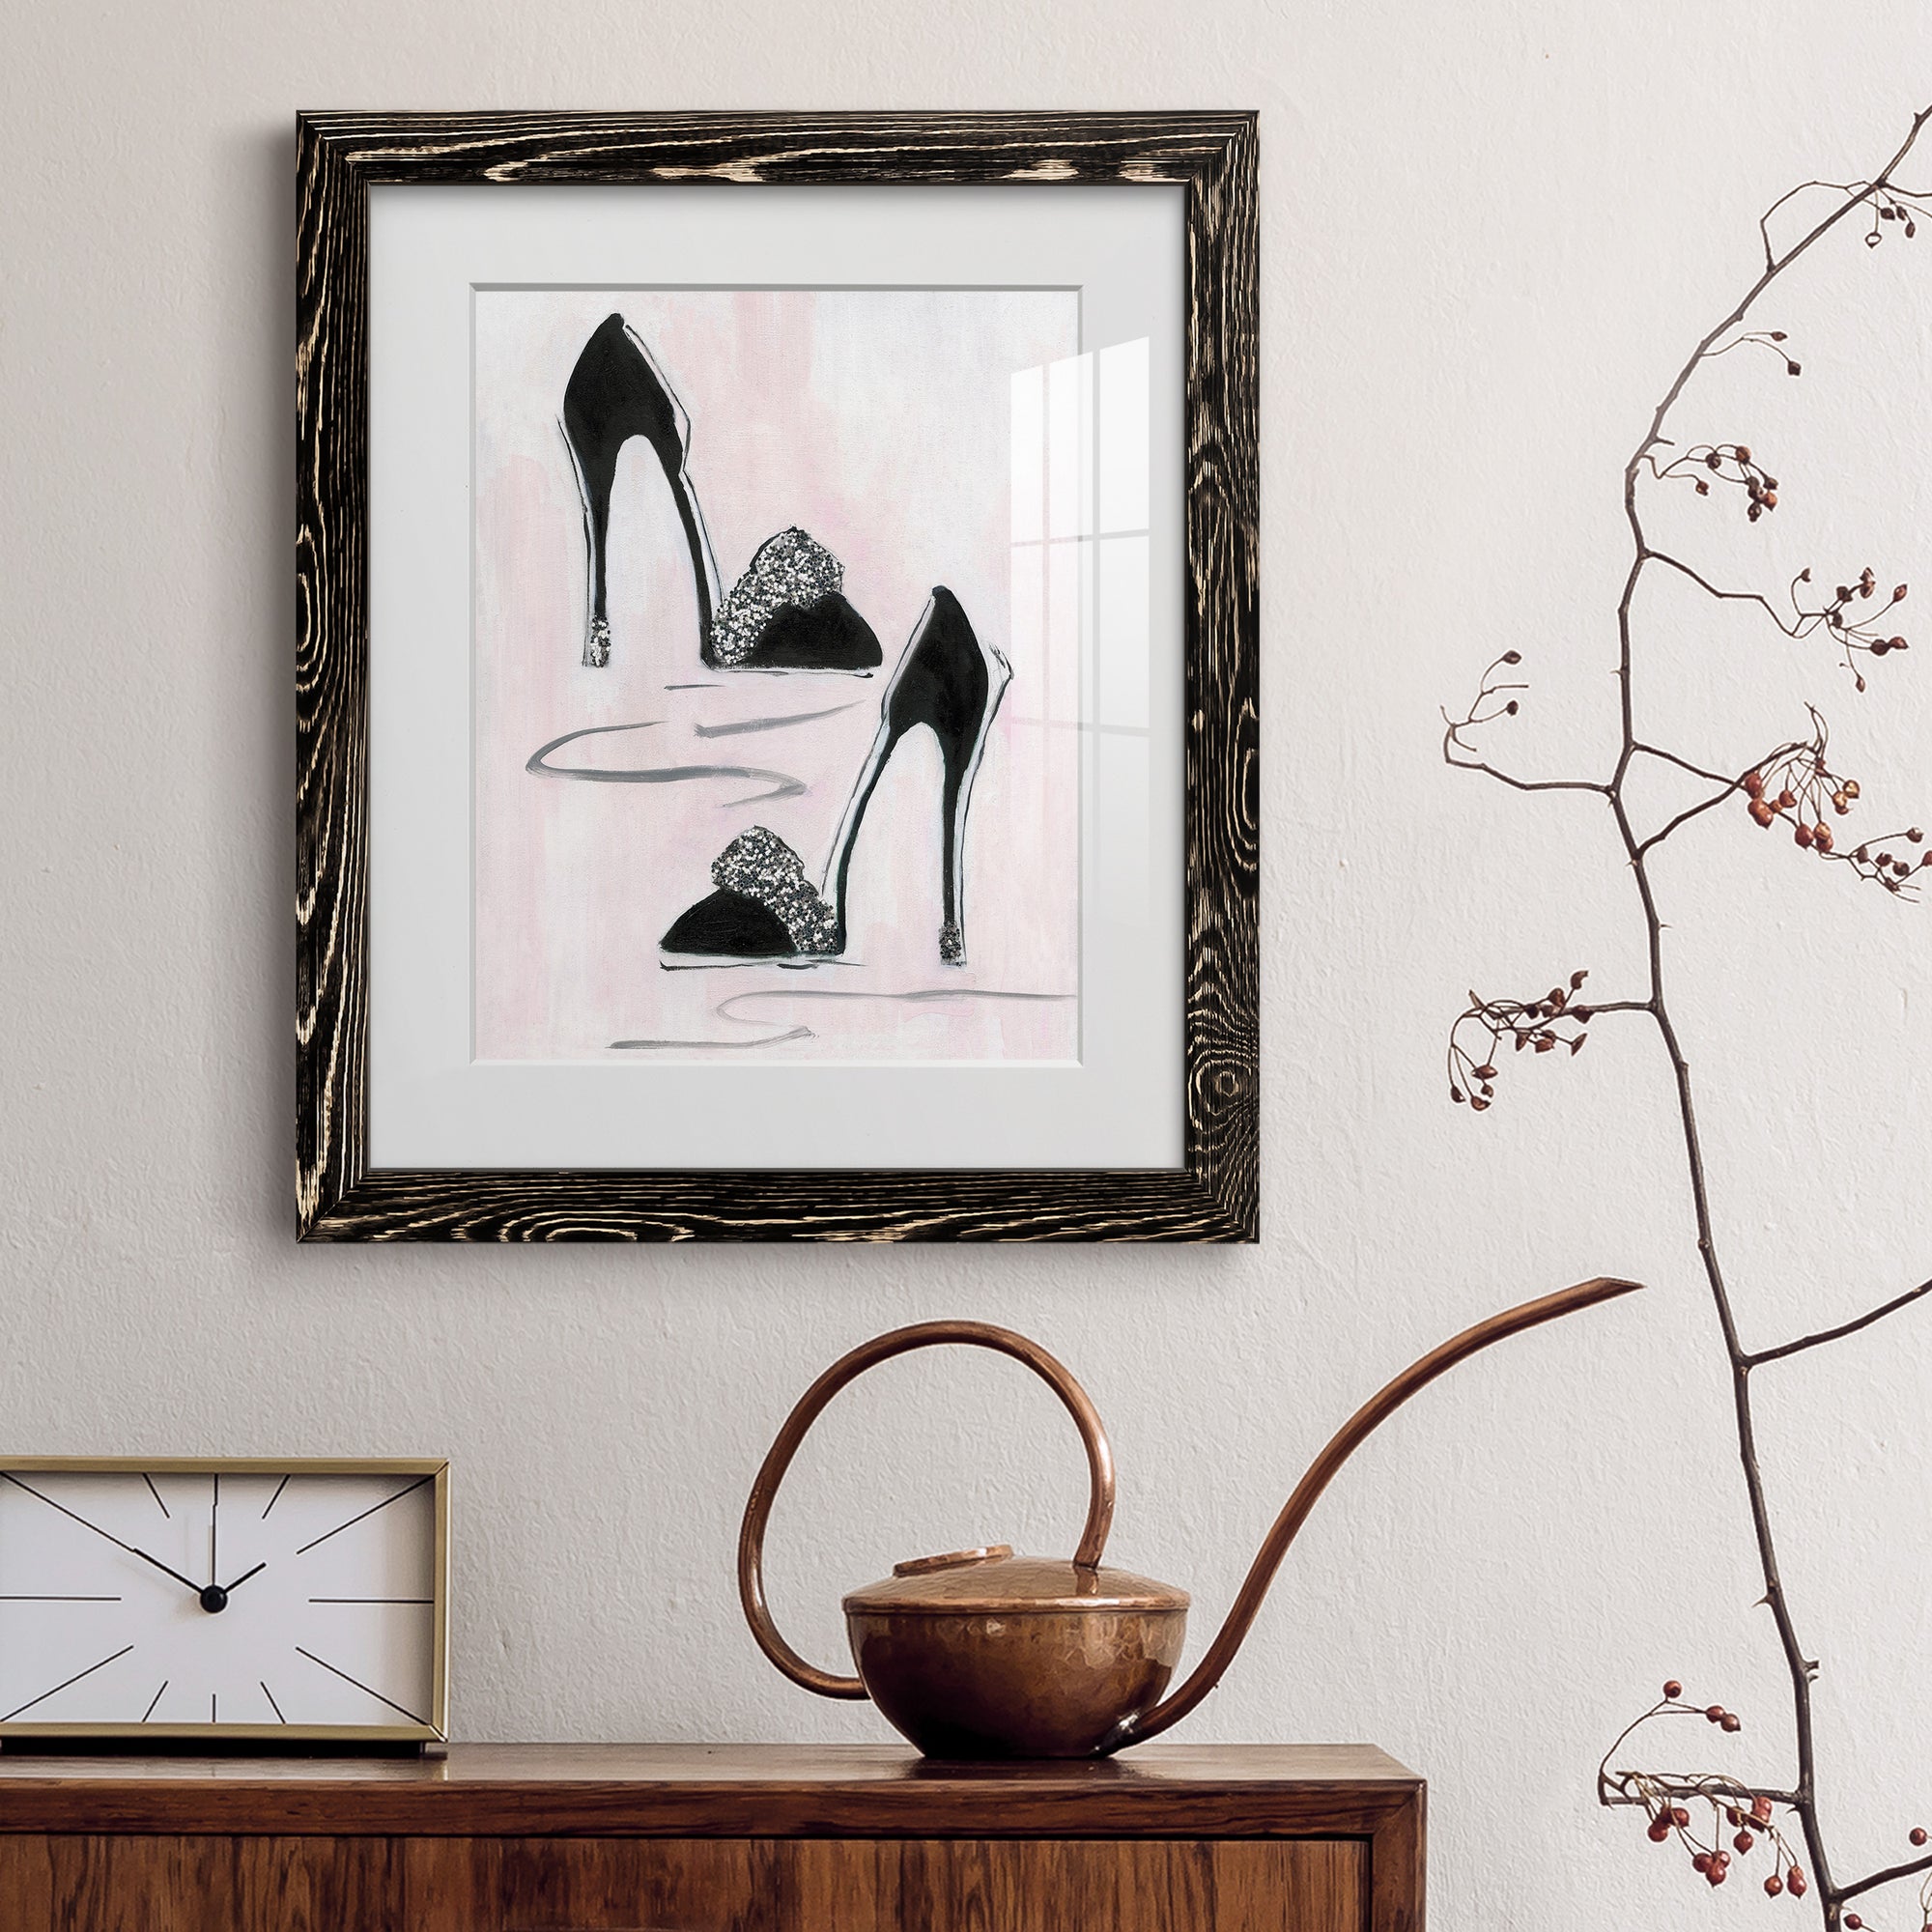 Shoes That Dazzle II - Premium Framed Print - Distressed Barnwood Frame - Ready to Hang